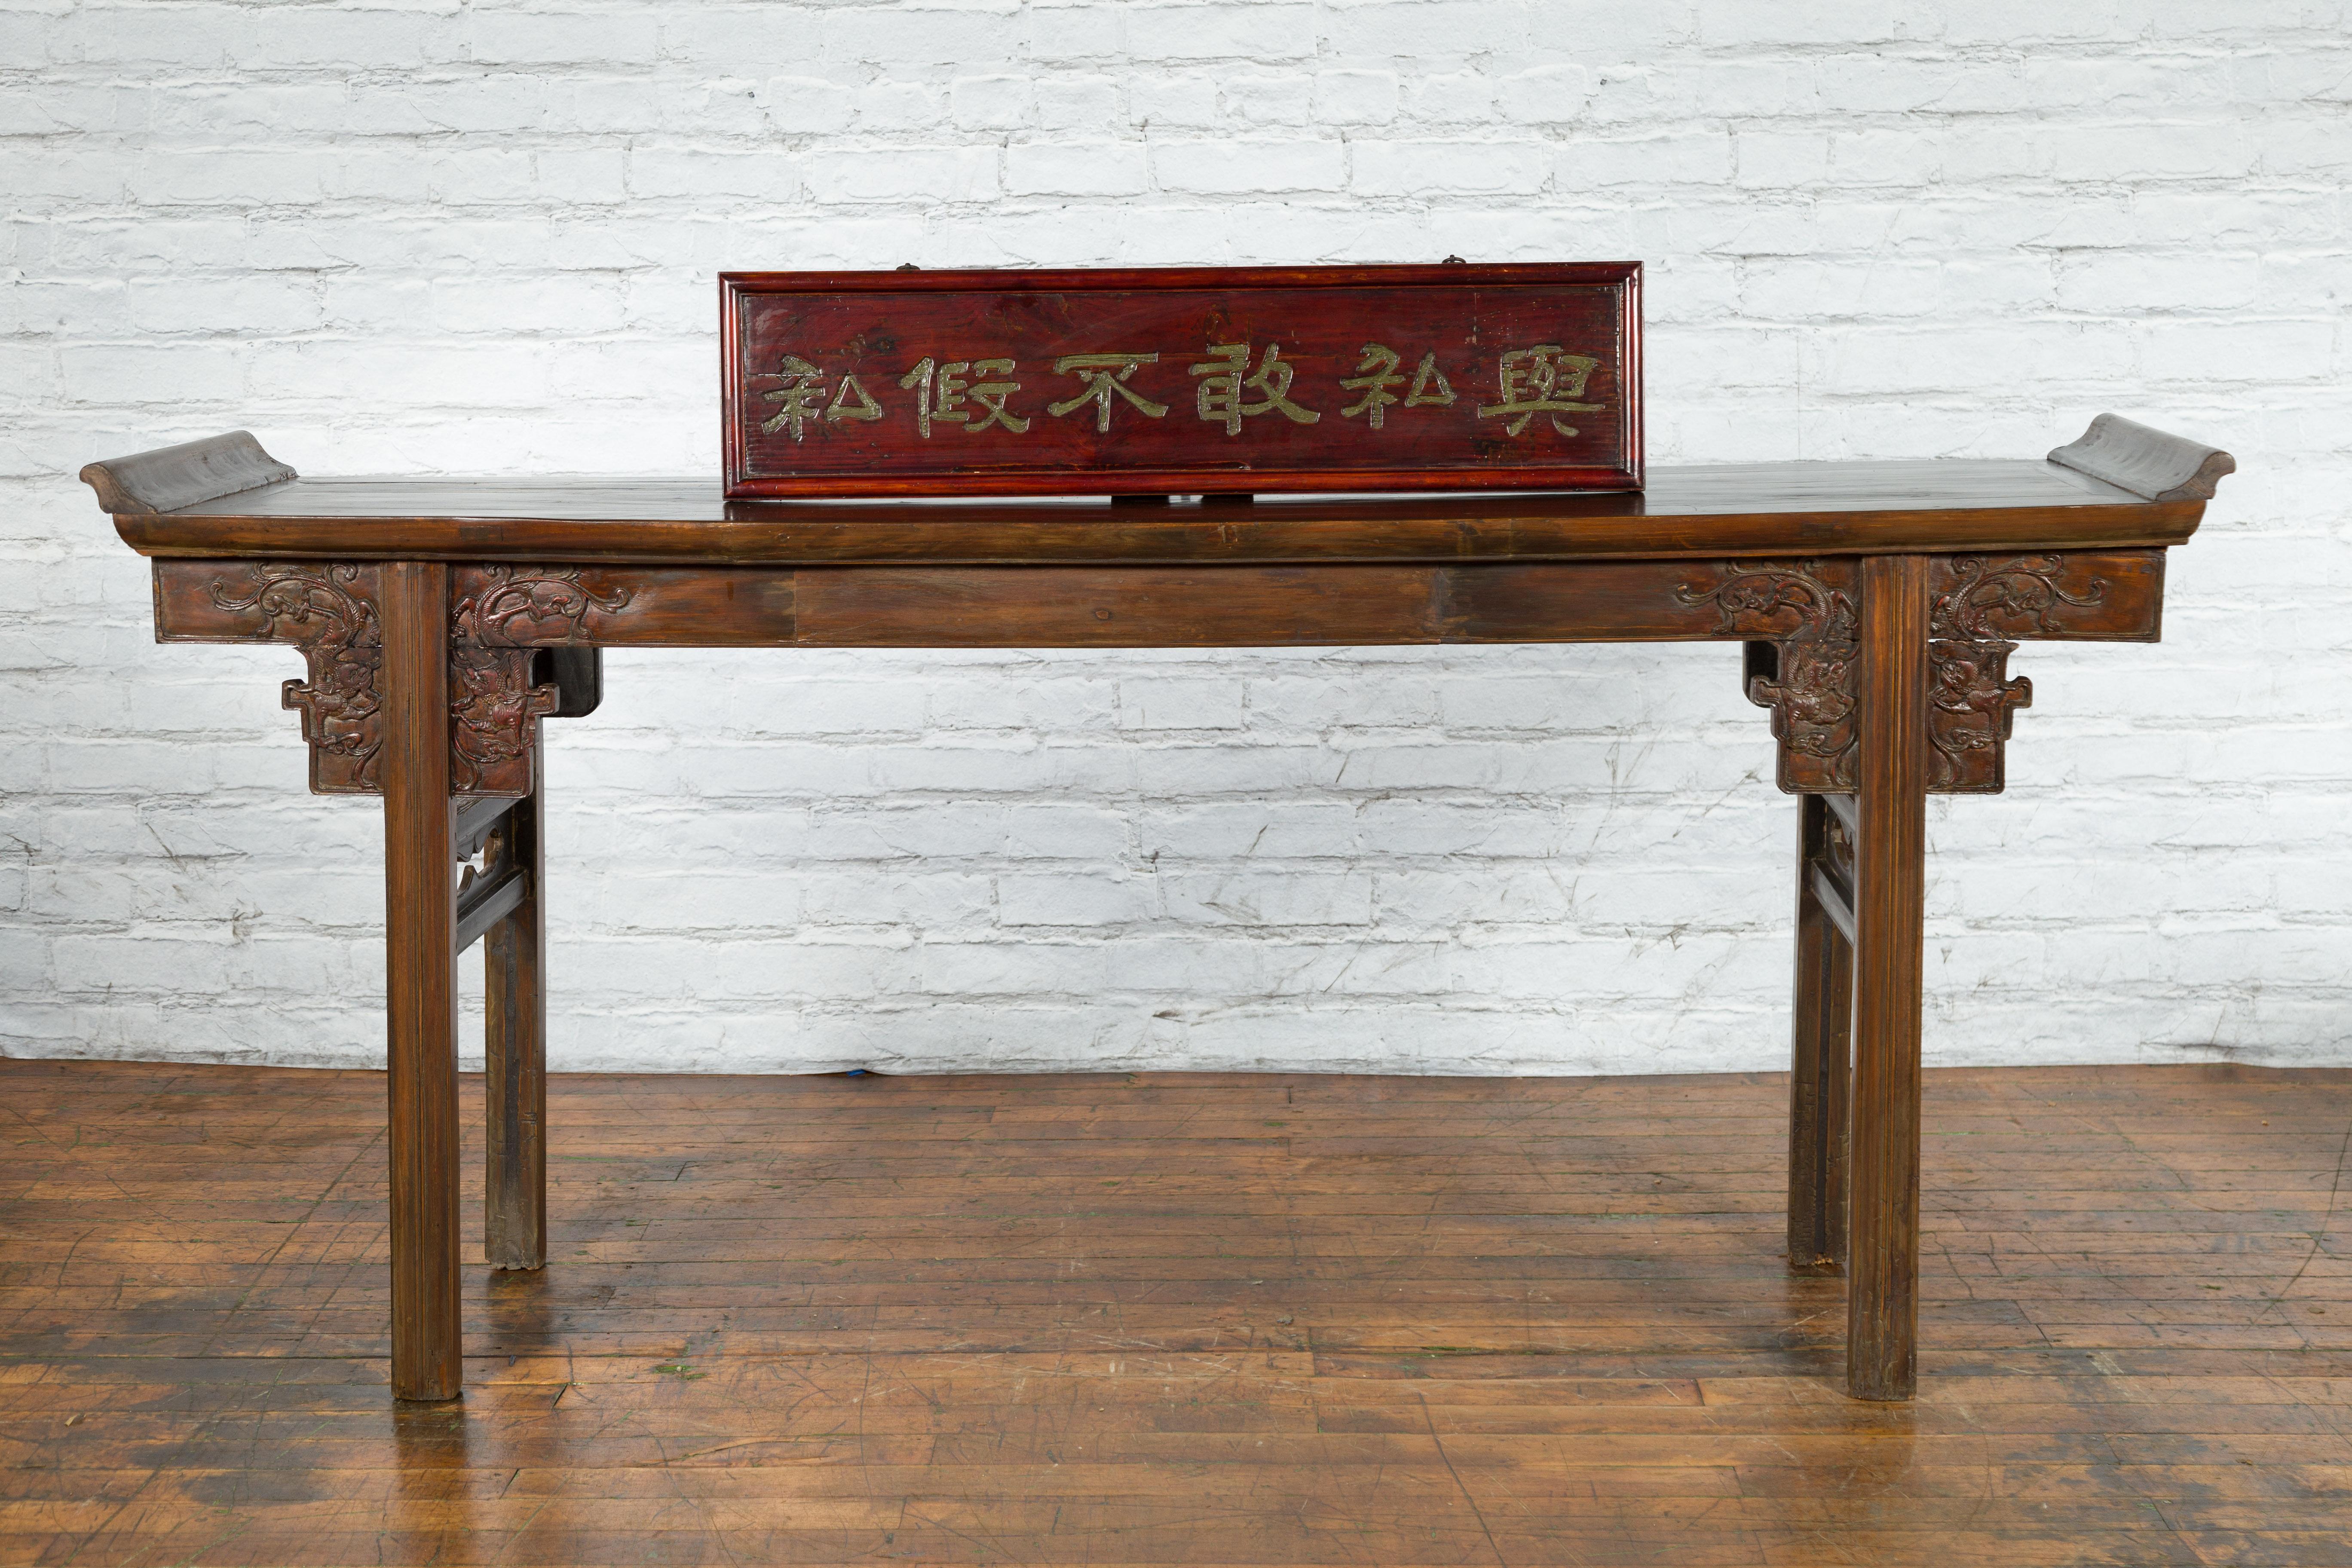 A vintage Chinese horizontal shop sign from the mid 20th century with lacquered finish, carved and gilt calligraphy. Created in China during the midcentury period, this horizontal shop sign features an outer molded frame surrounding a beautiful